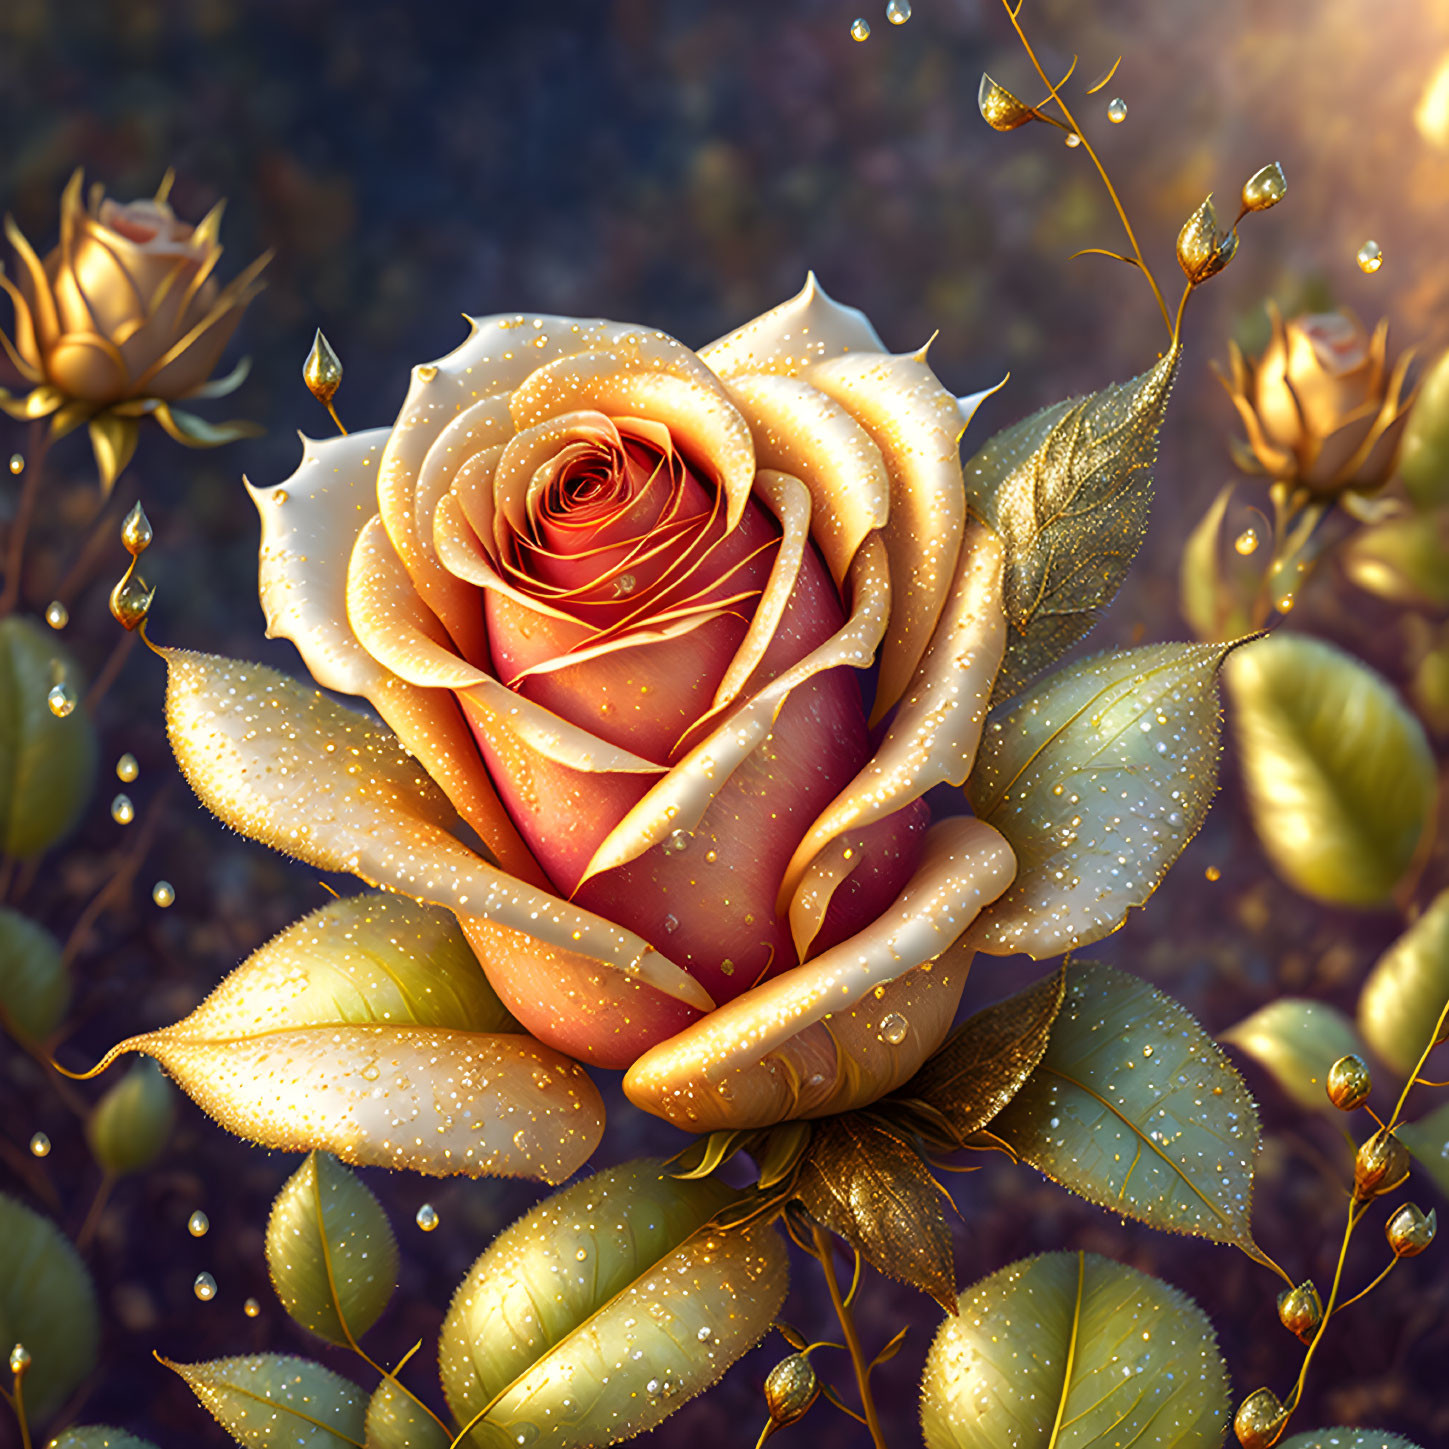 Golden Rose with Dewdrops Among Buds and Leaves in Warm Light